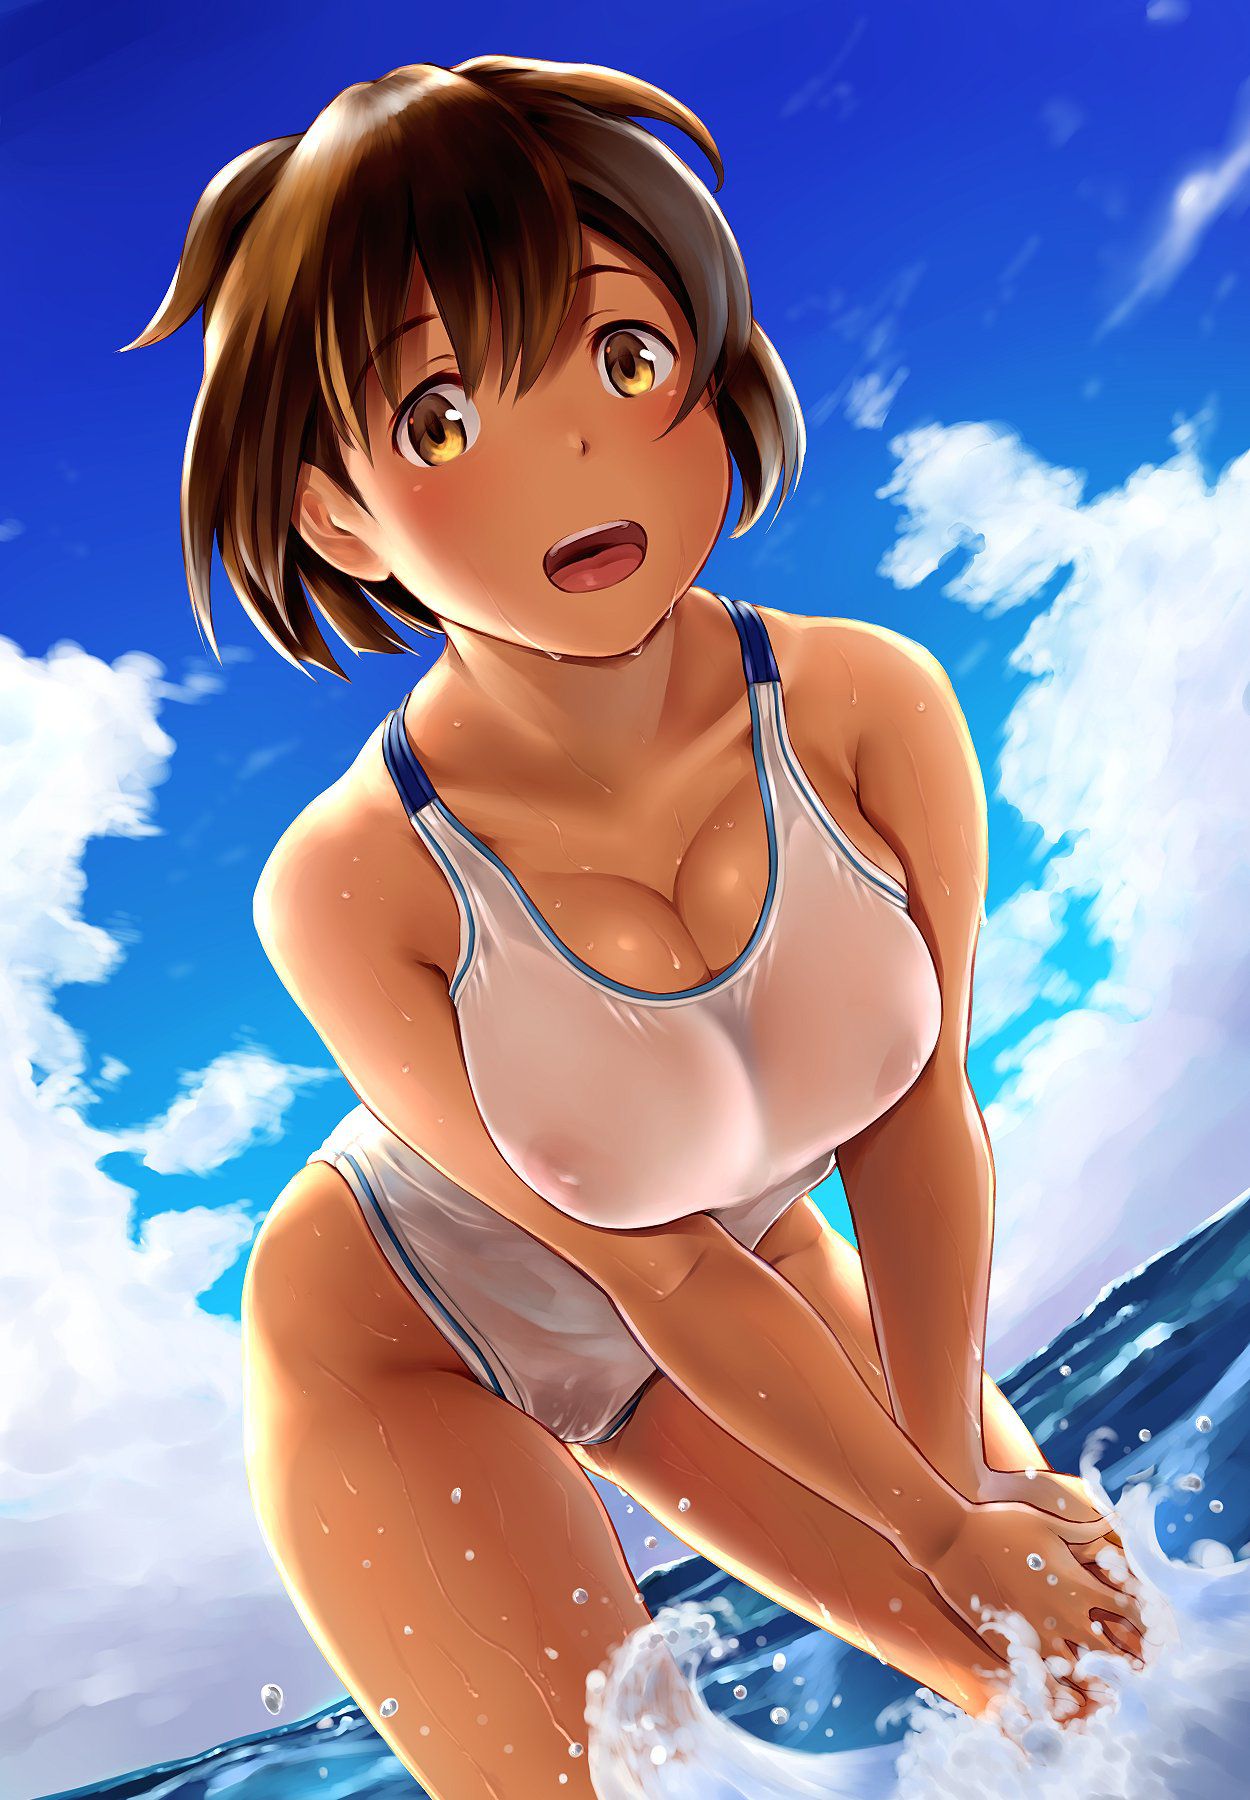 Erotic anime summary Erotic image collection of wet transparent beauties and beautiful girls that are variously transparent [50 sheets] 50